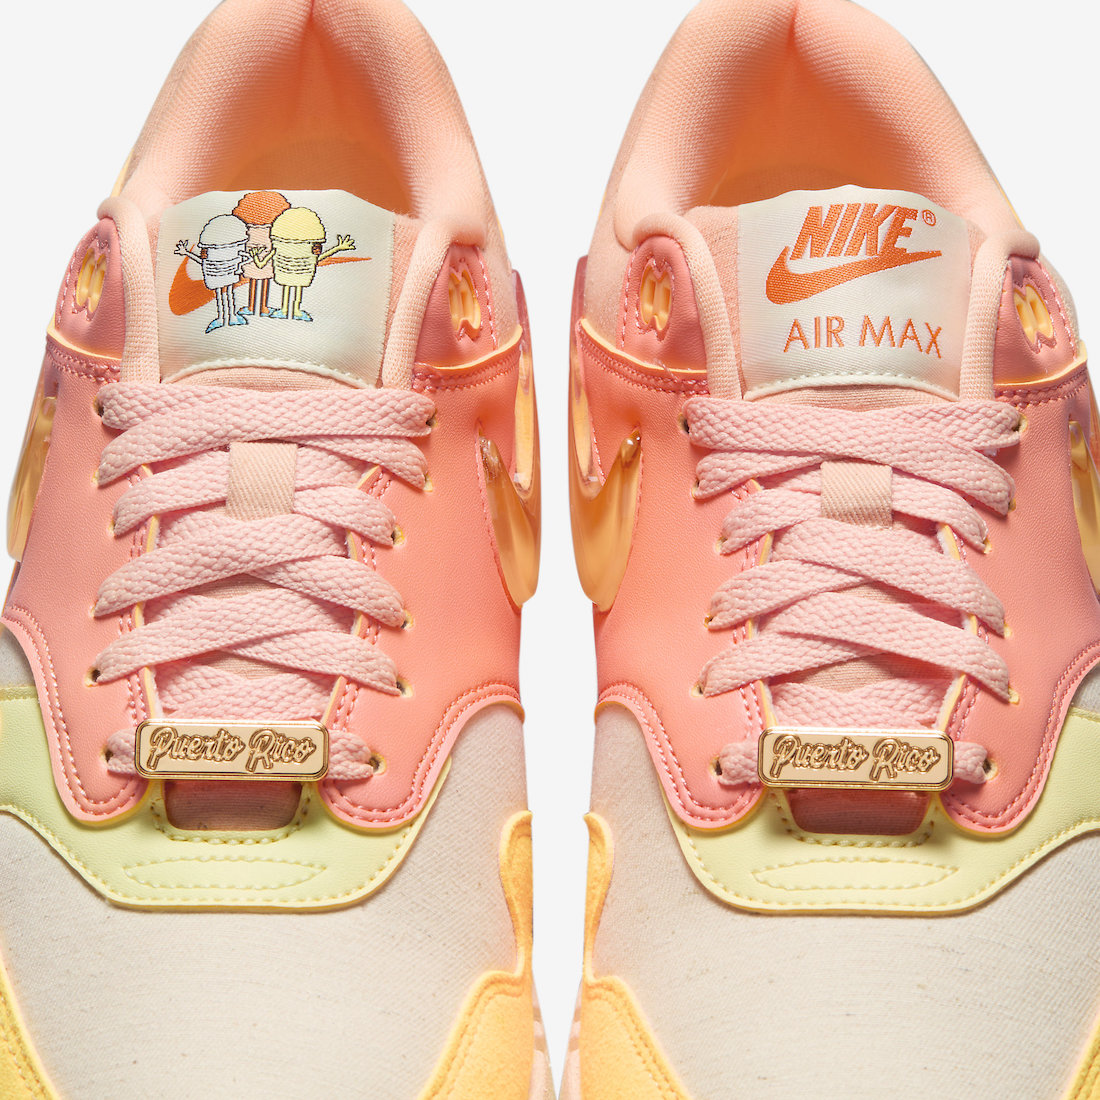 Nike Air Max 1 Puerto Rico Orange Frost FD6955 800 Release Date 8